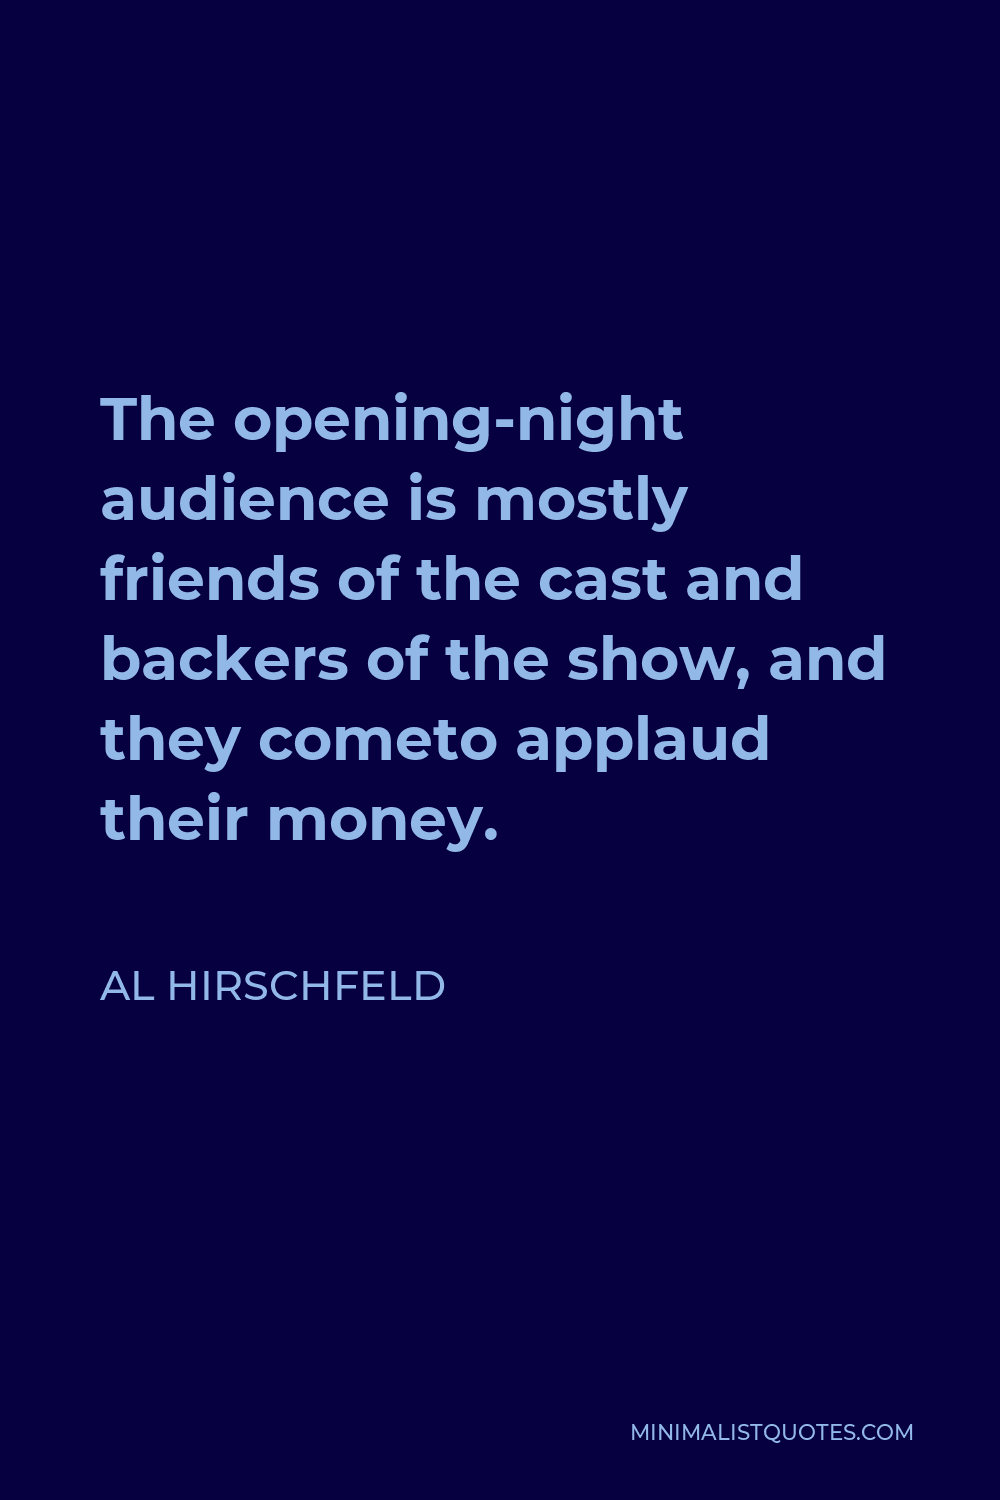 Al Hirschfeld Quote - The opening-night audience is mostly friends of the cast and backers of the show, and they cometo applaud their money.